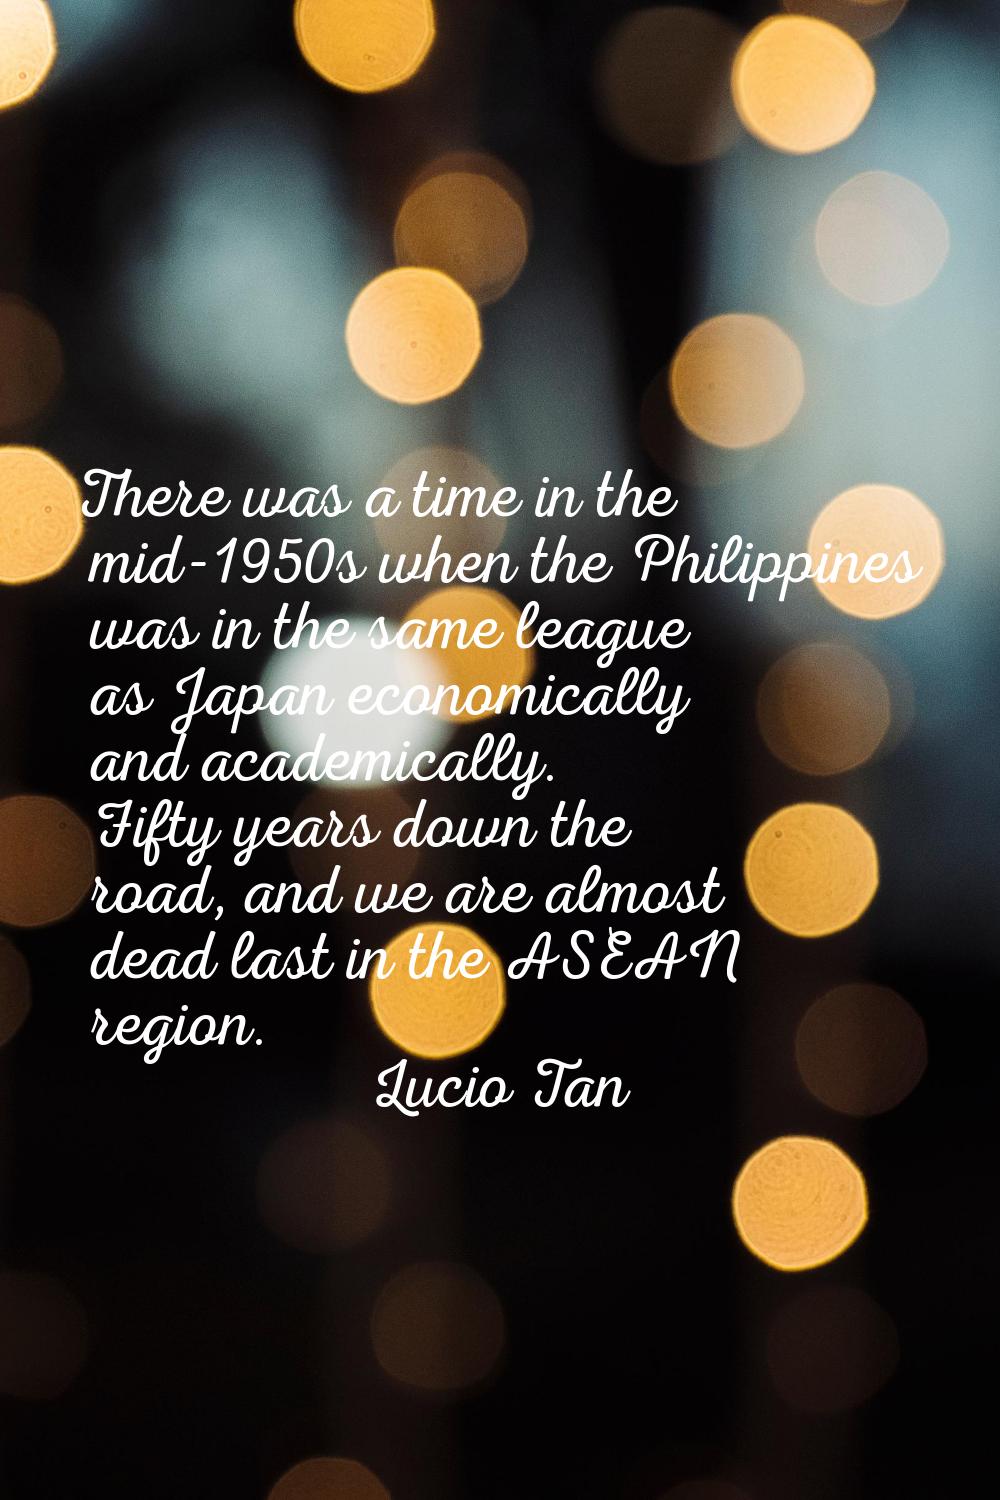 There was a time in the mid-1950s when the Philippines was in the same league as Japan economically